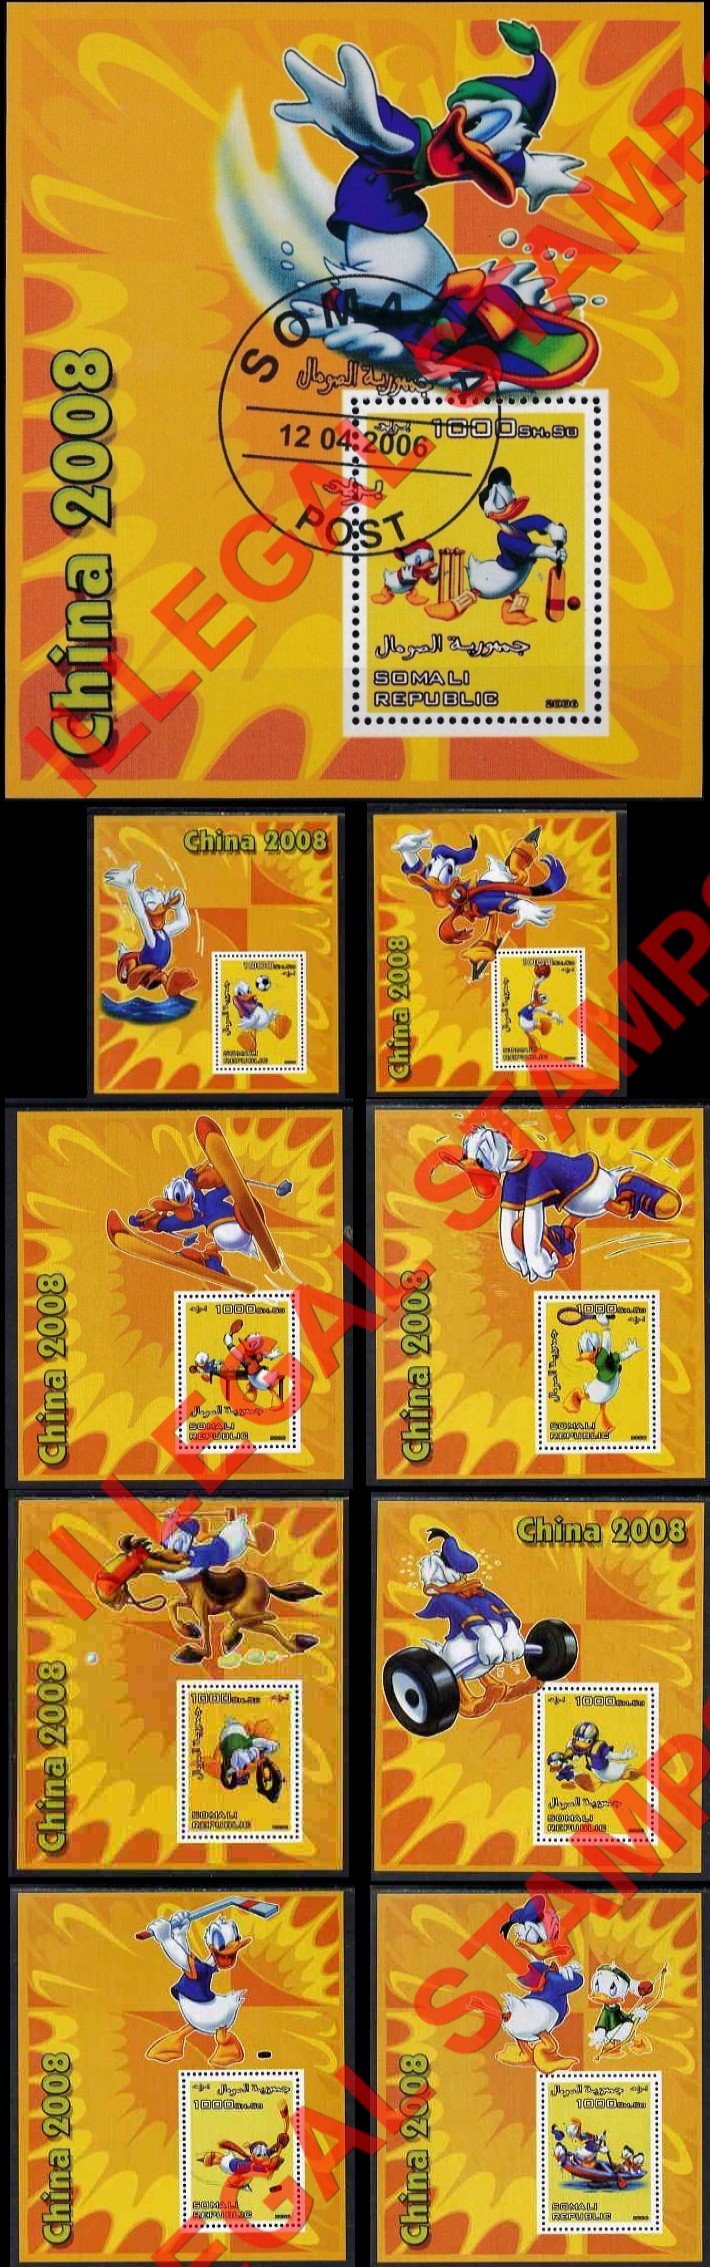 Somalia 2006 Donald Duck China 2008 Olympics Illegal Stamp Souvenir Sheets of 1 Without Olympic Ring Overprints